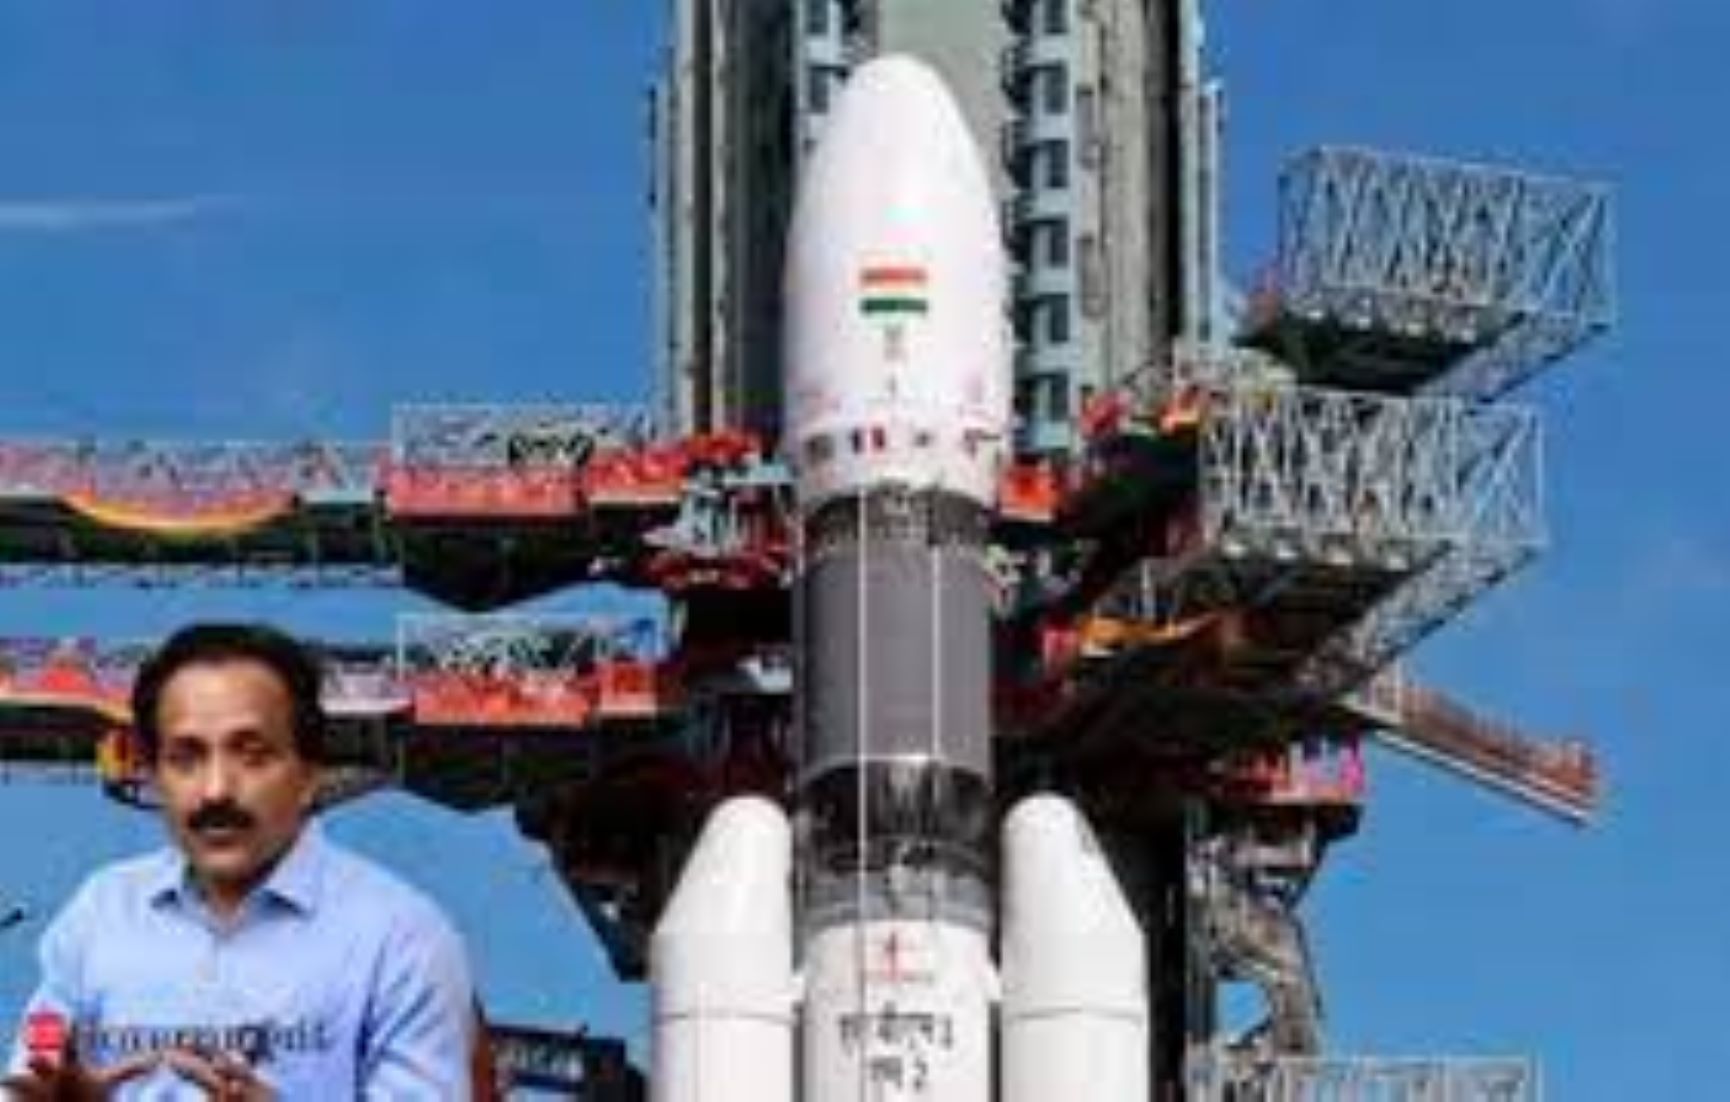 India’s Third Moon Mission To Be Launched In July: Space Agency Chief